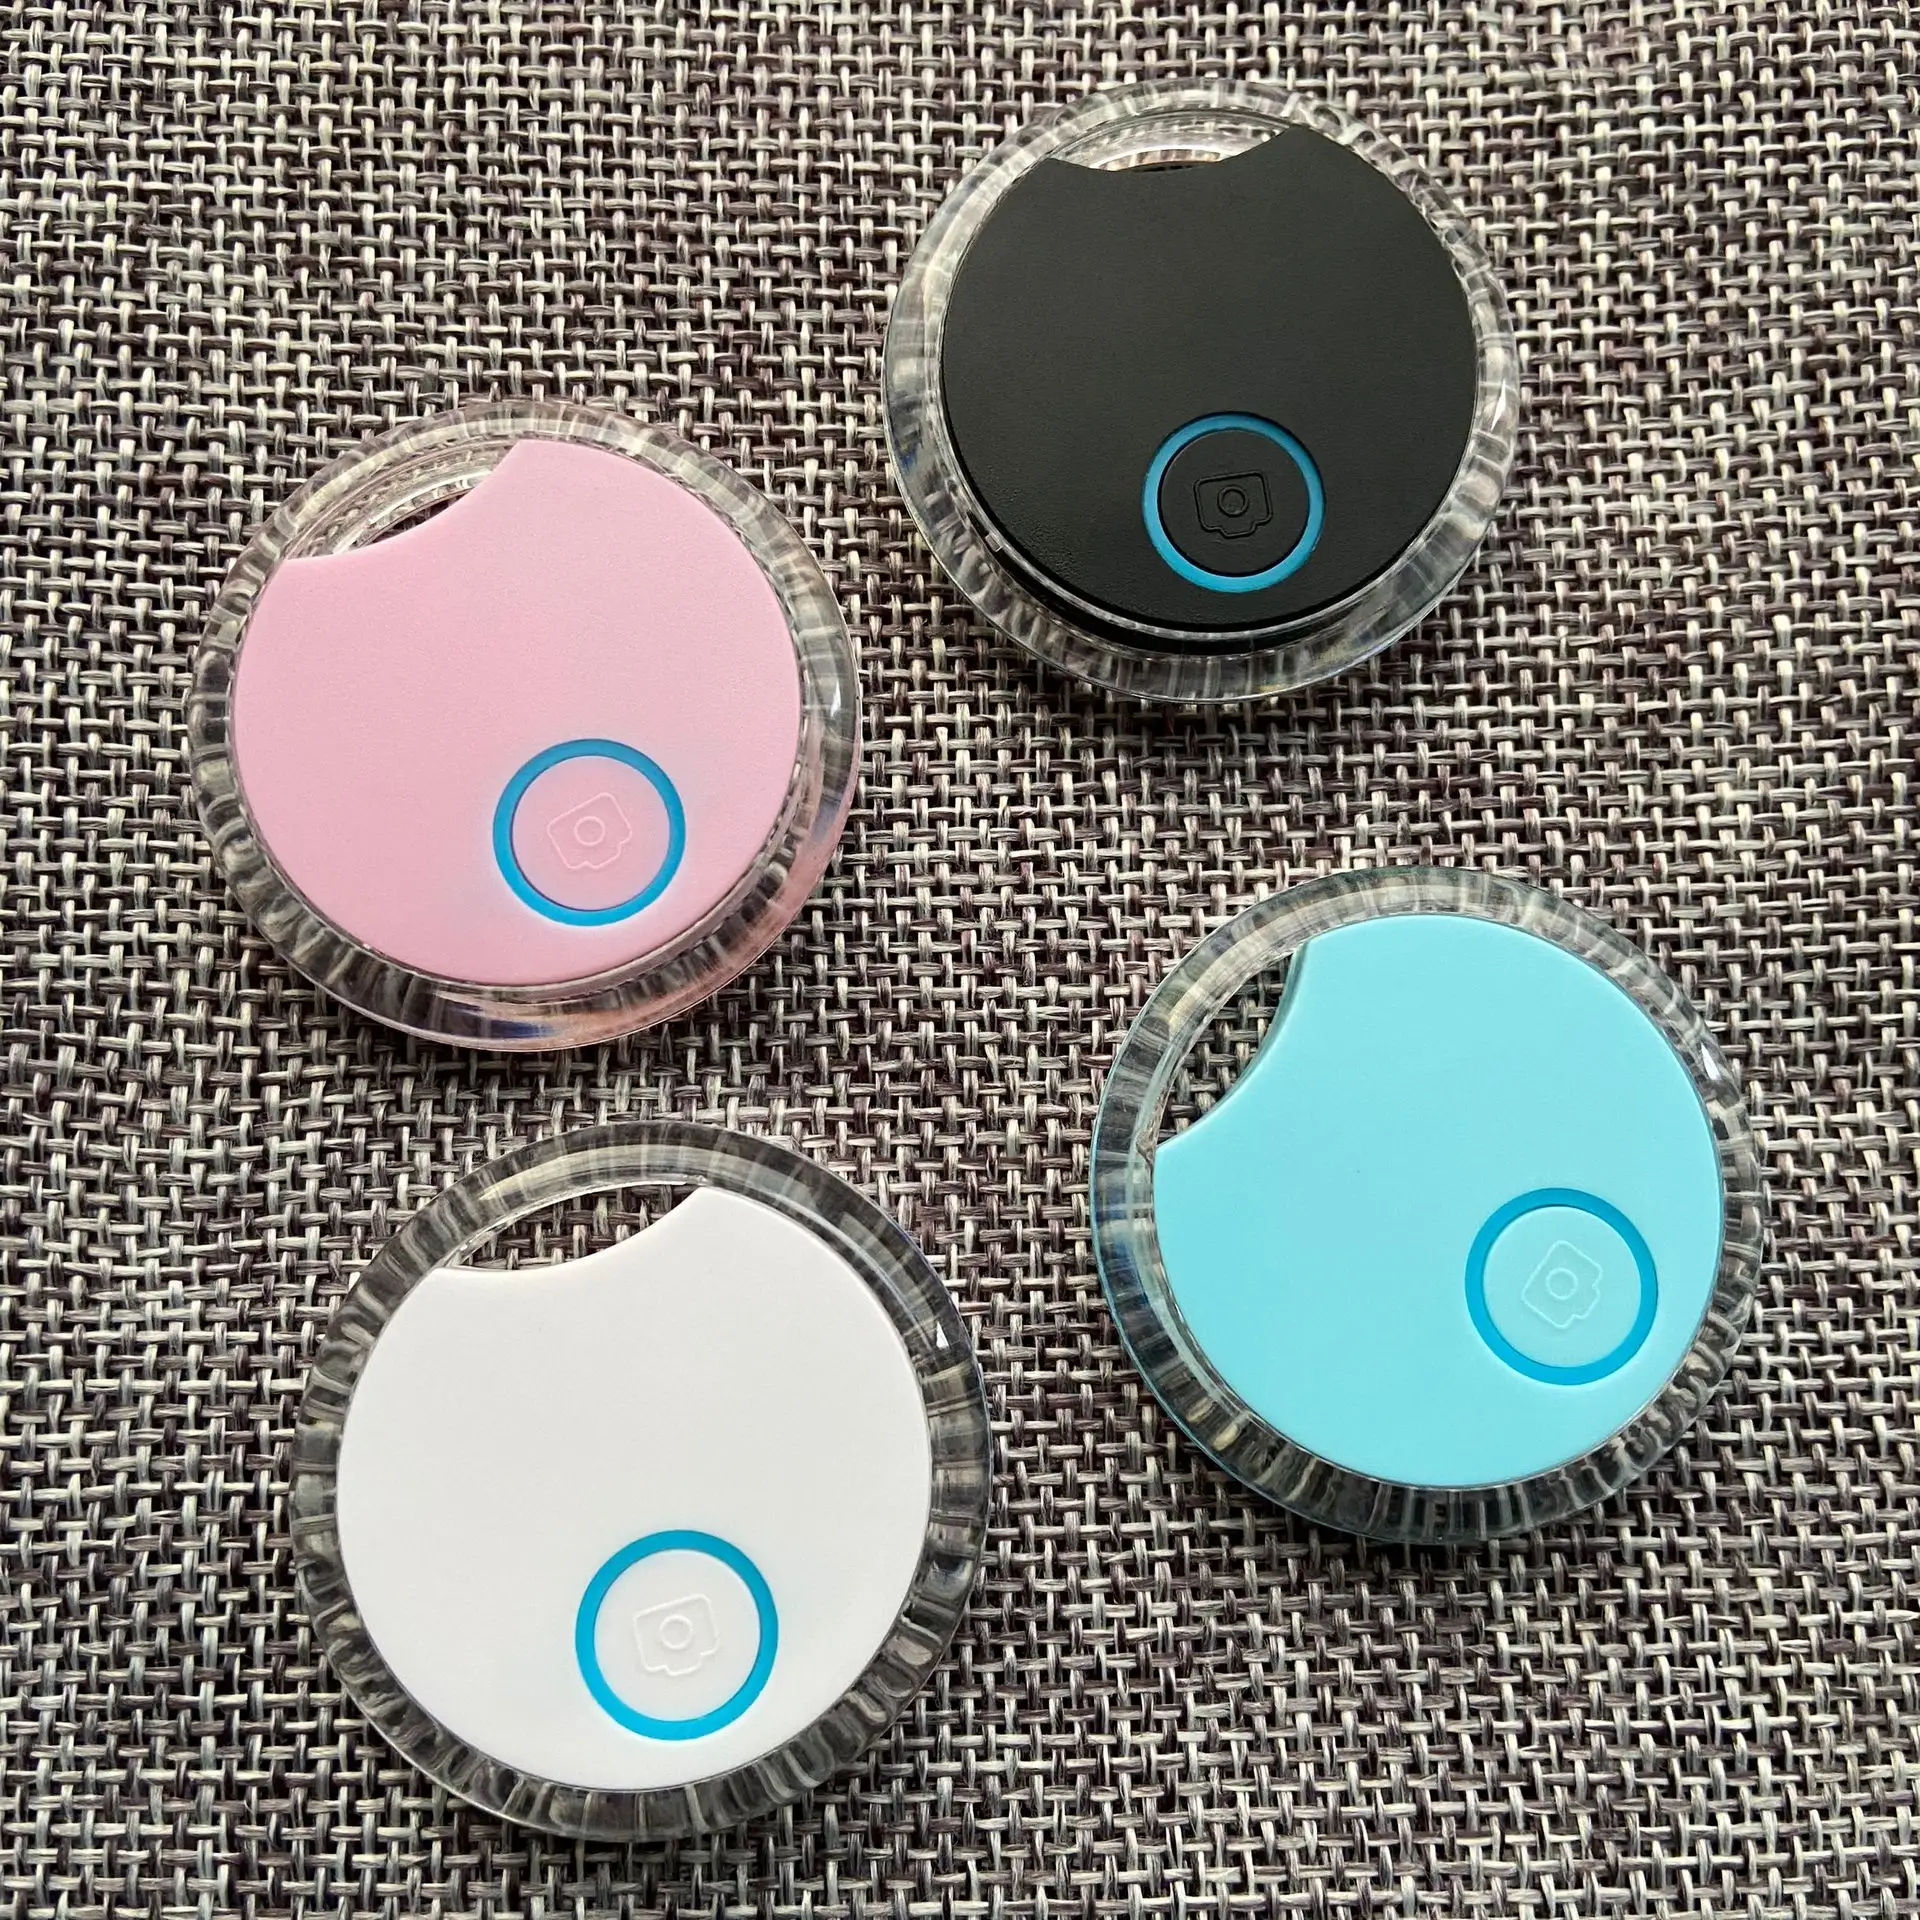 Sell in stock hot cat round anti loss locator card dog smart battery key child retainer Finder RTS waterproof pet crystal GPS tracker